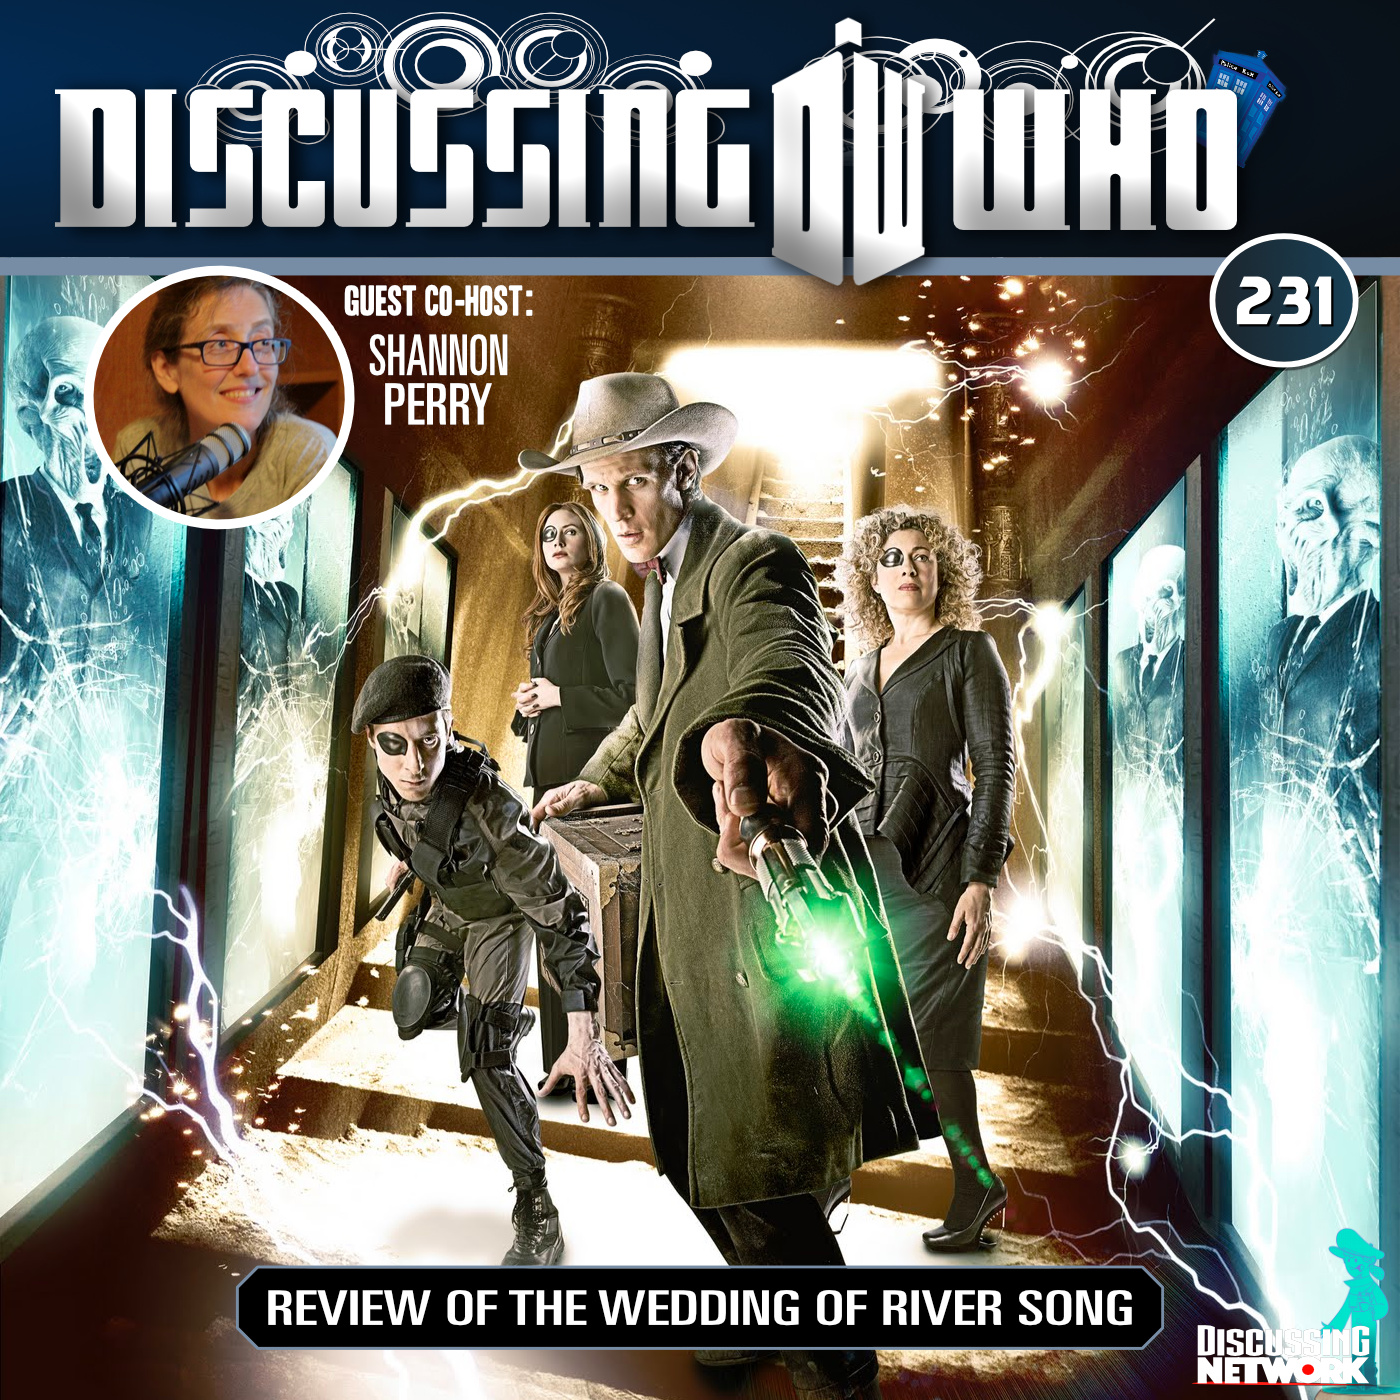 Review of the Wedding of River Song